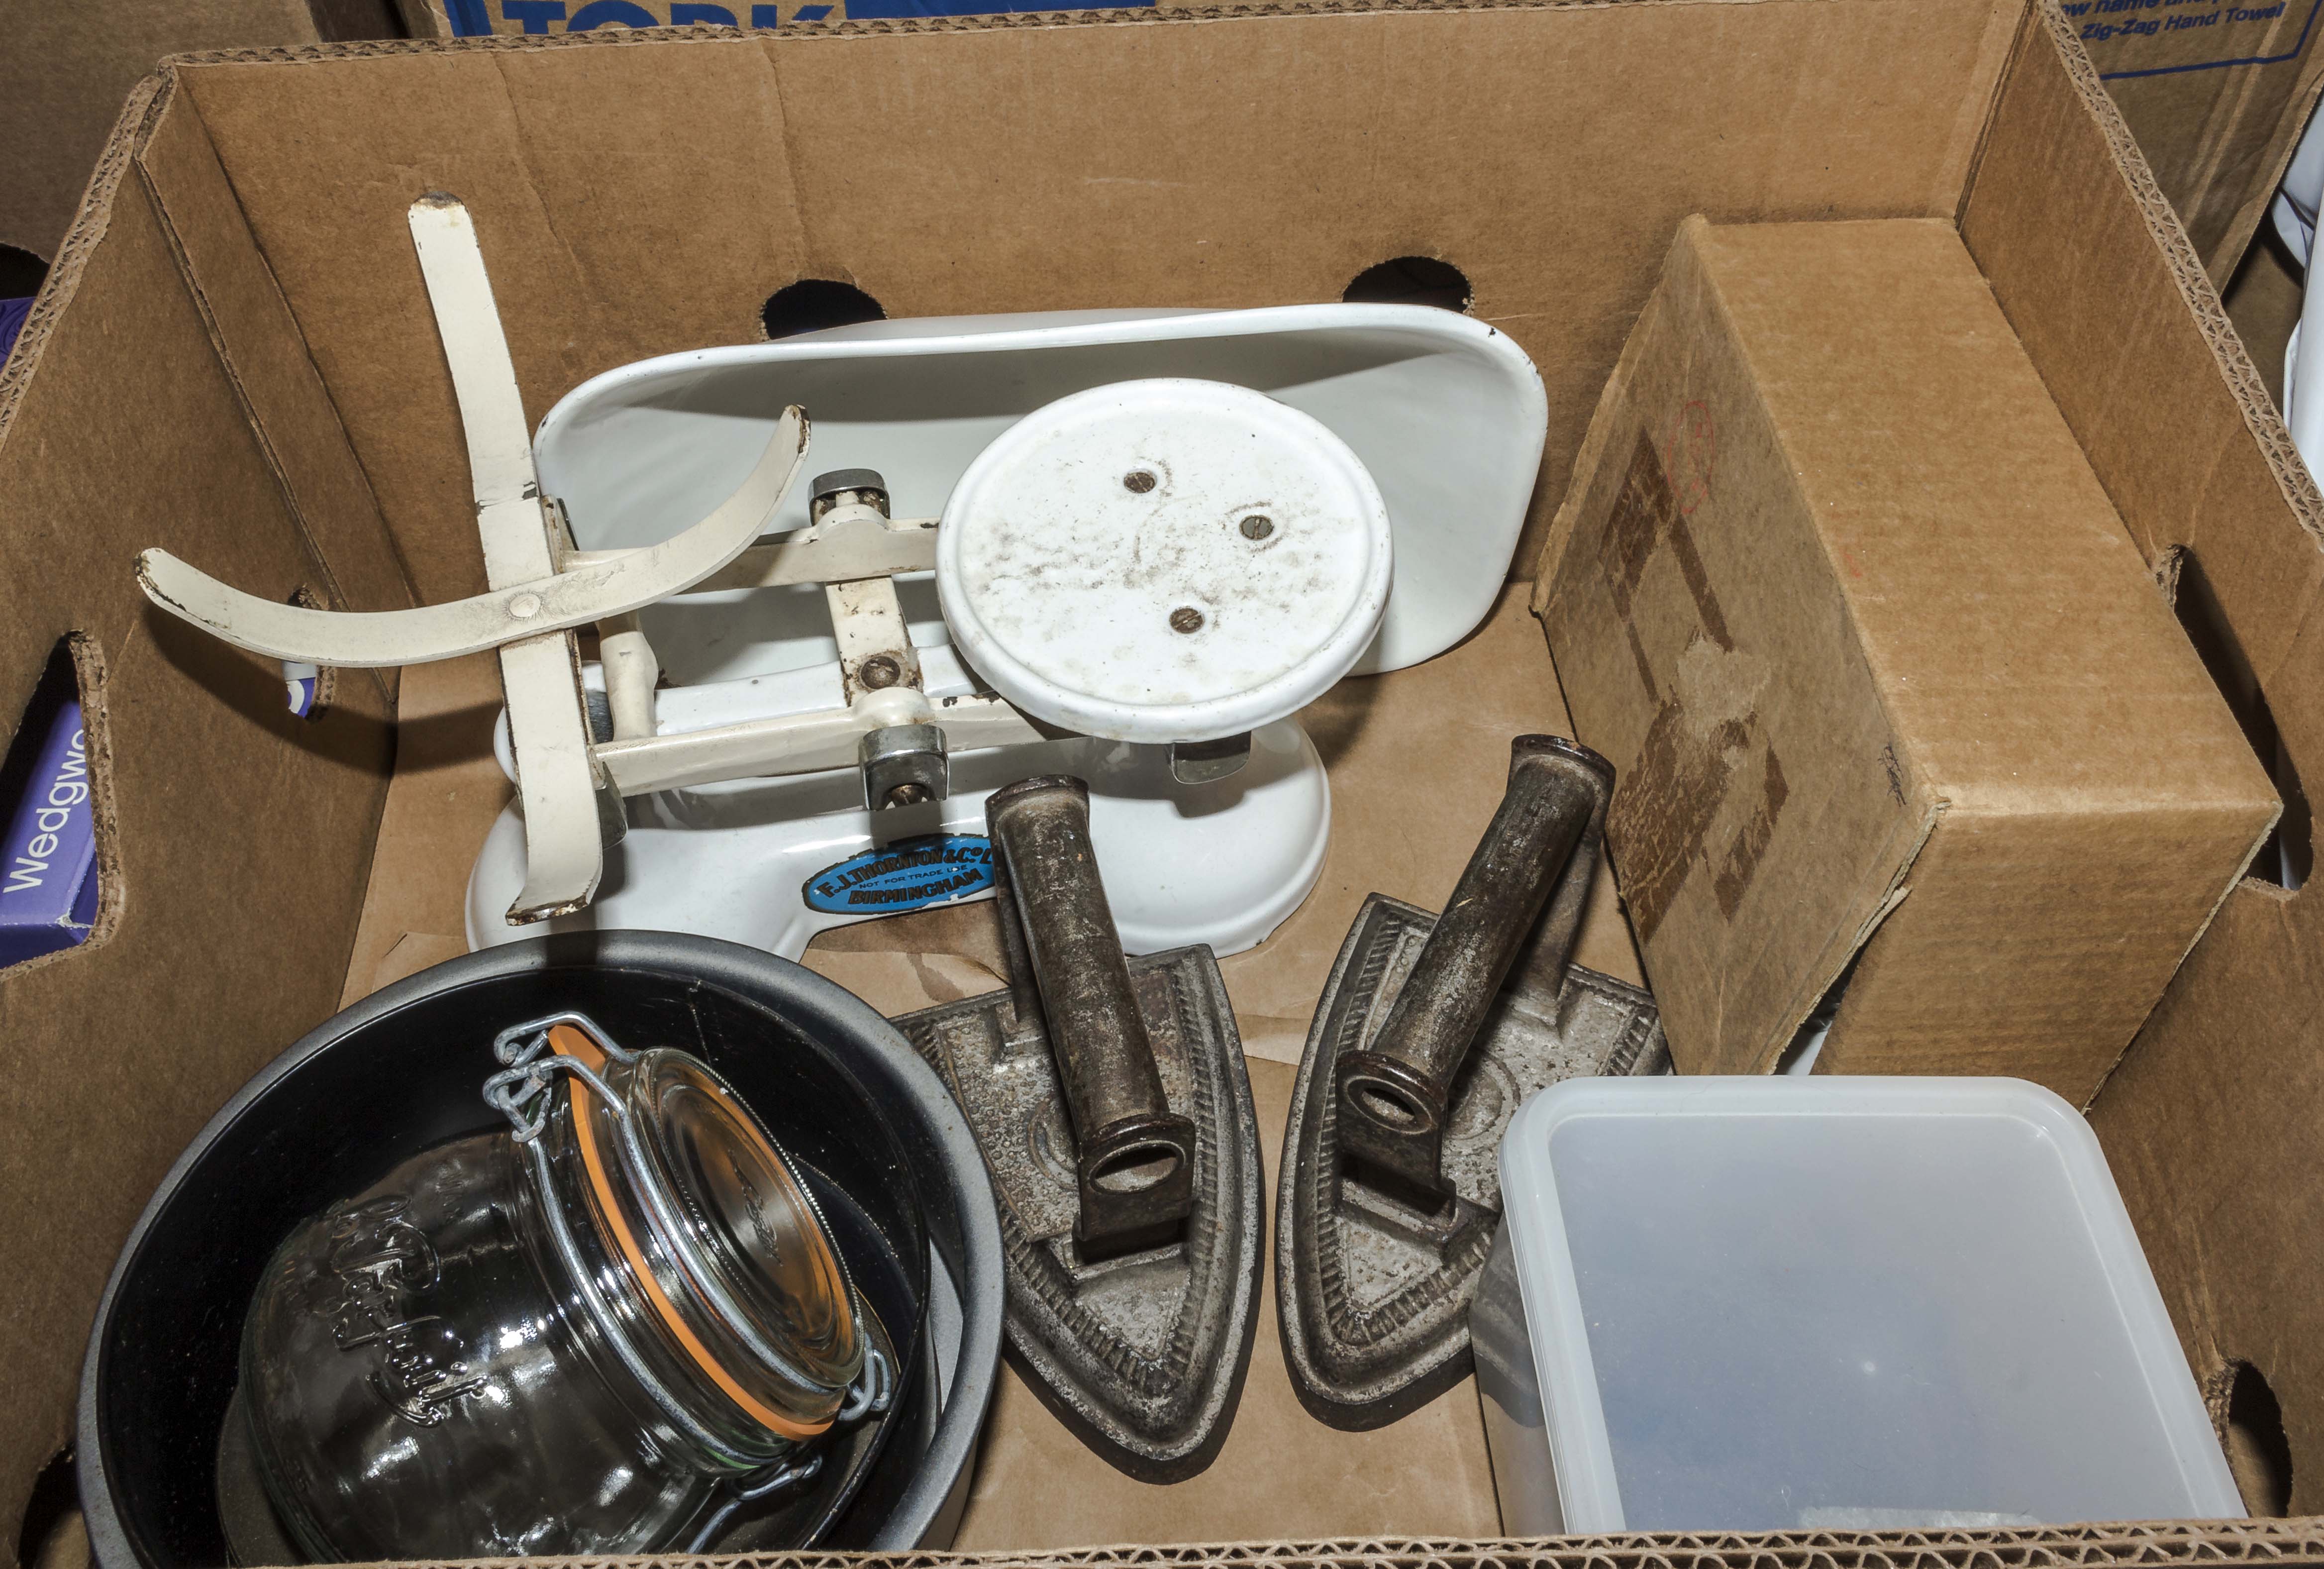 A box containing scales, irons and other items